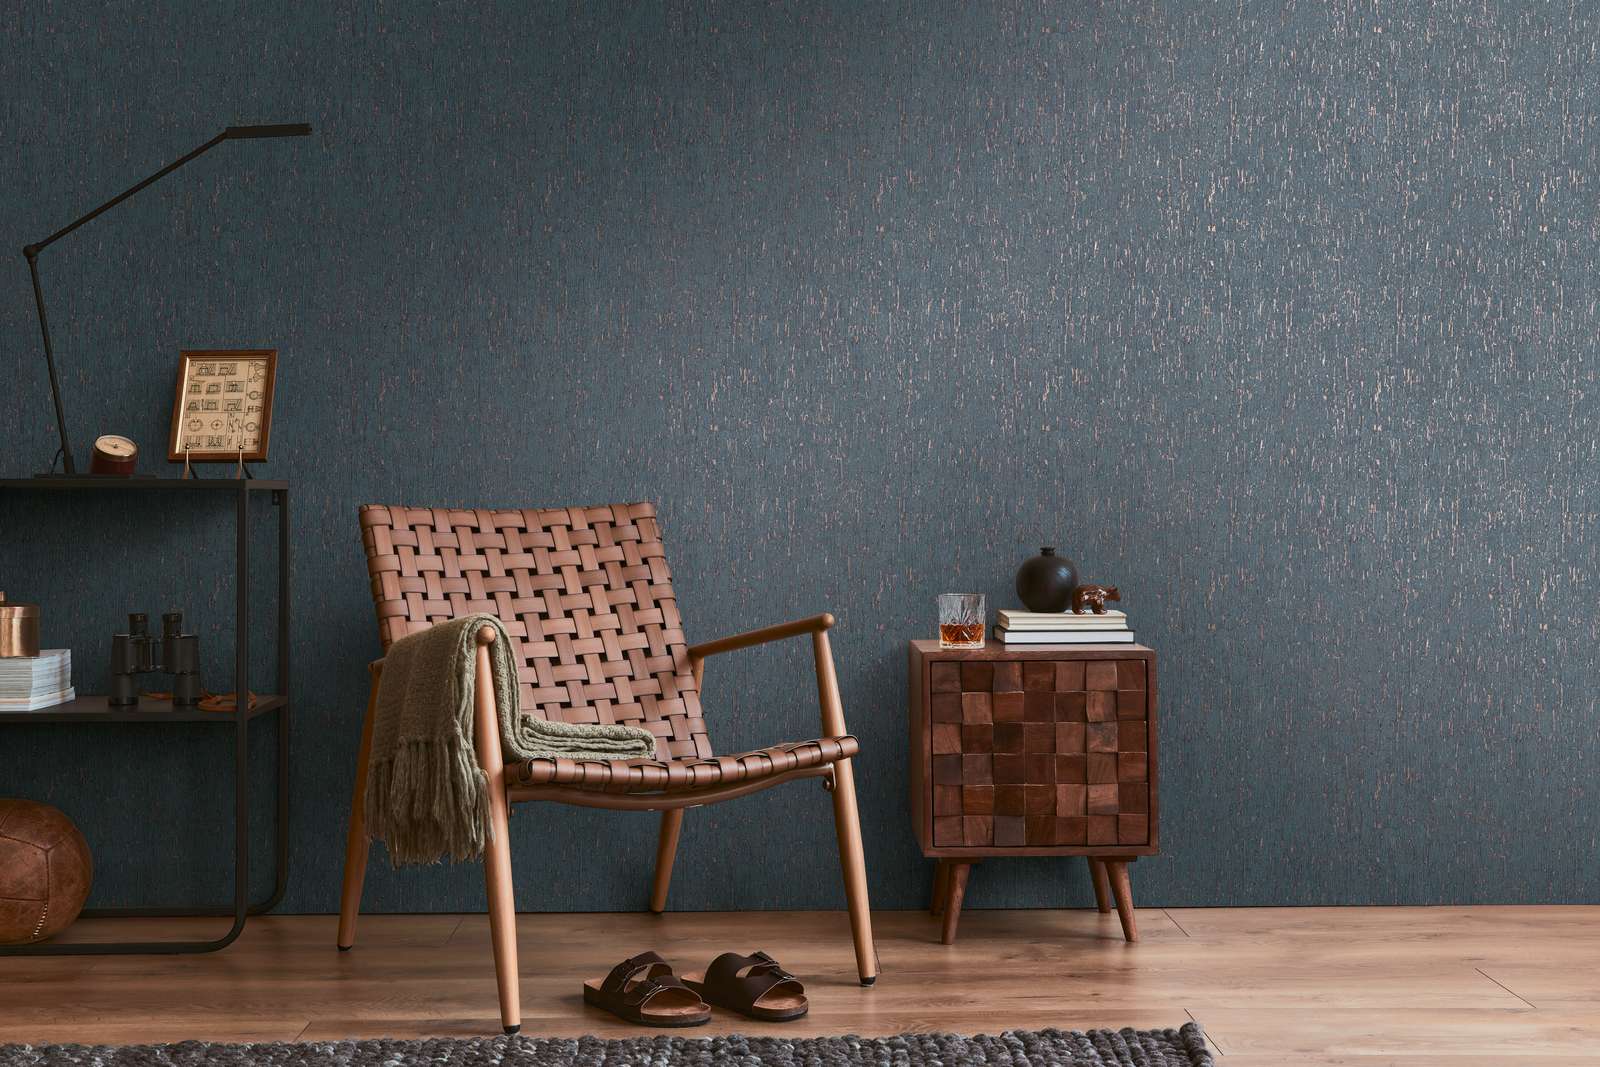             Non-woven wallpaper in plaster look with accents - blue, bronze, metallic
        